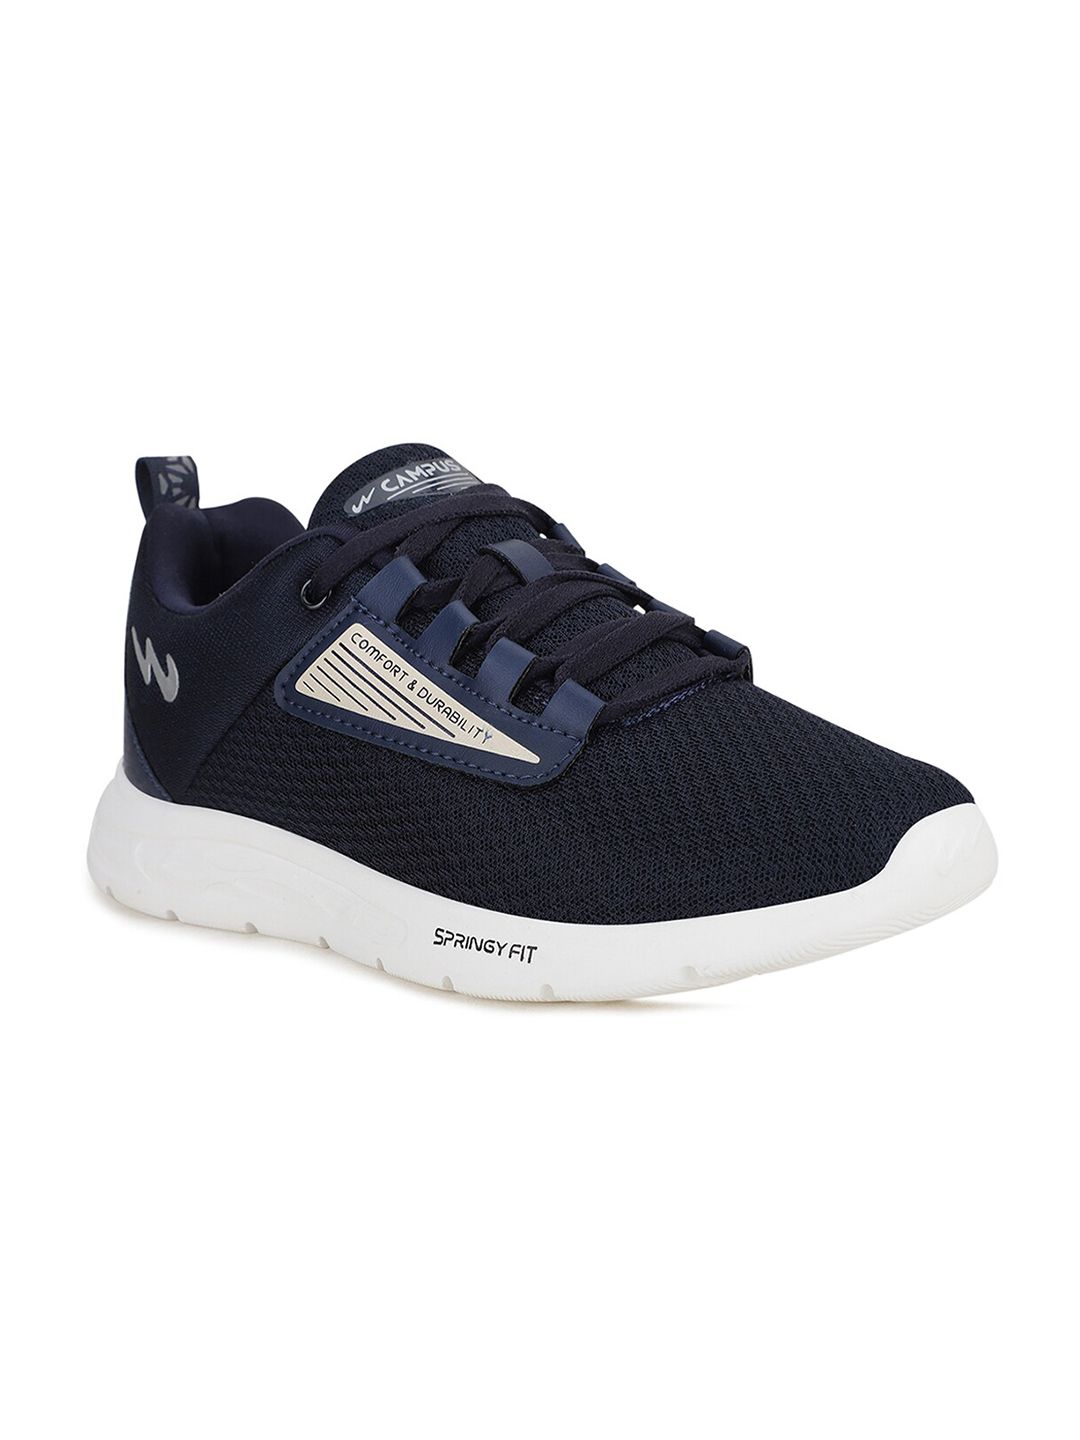 Campus Women Navy Blue Mesh Running Shoes Price in India